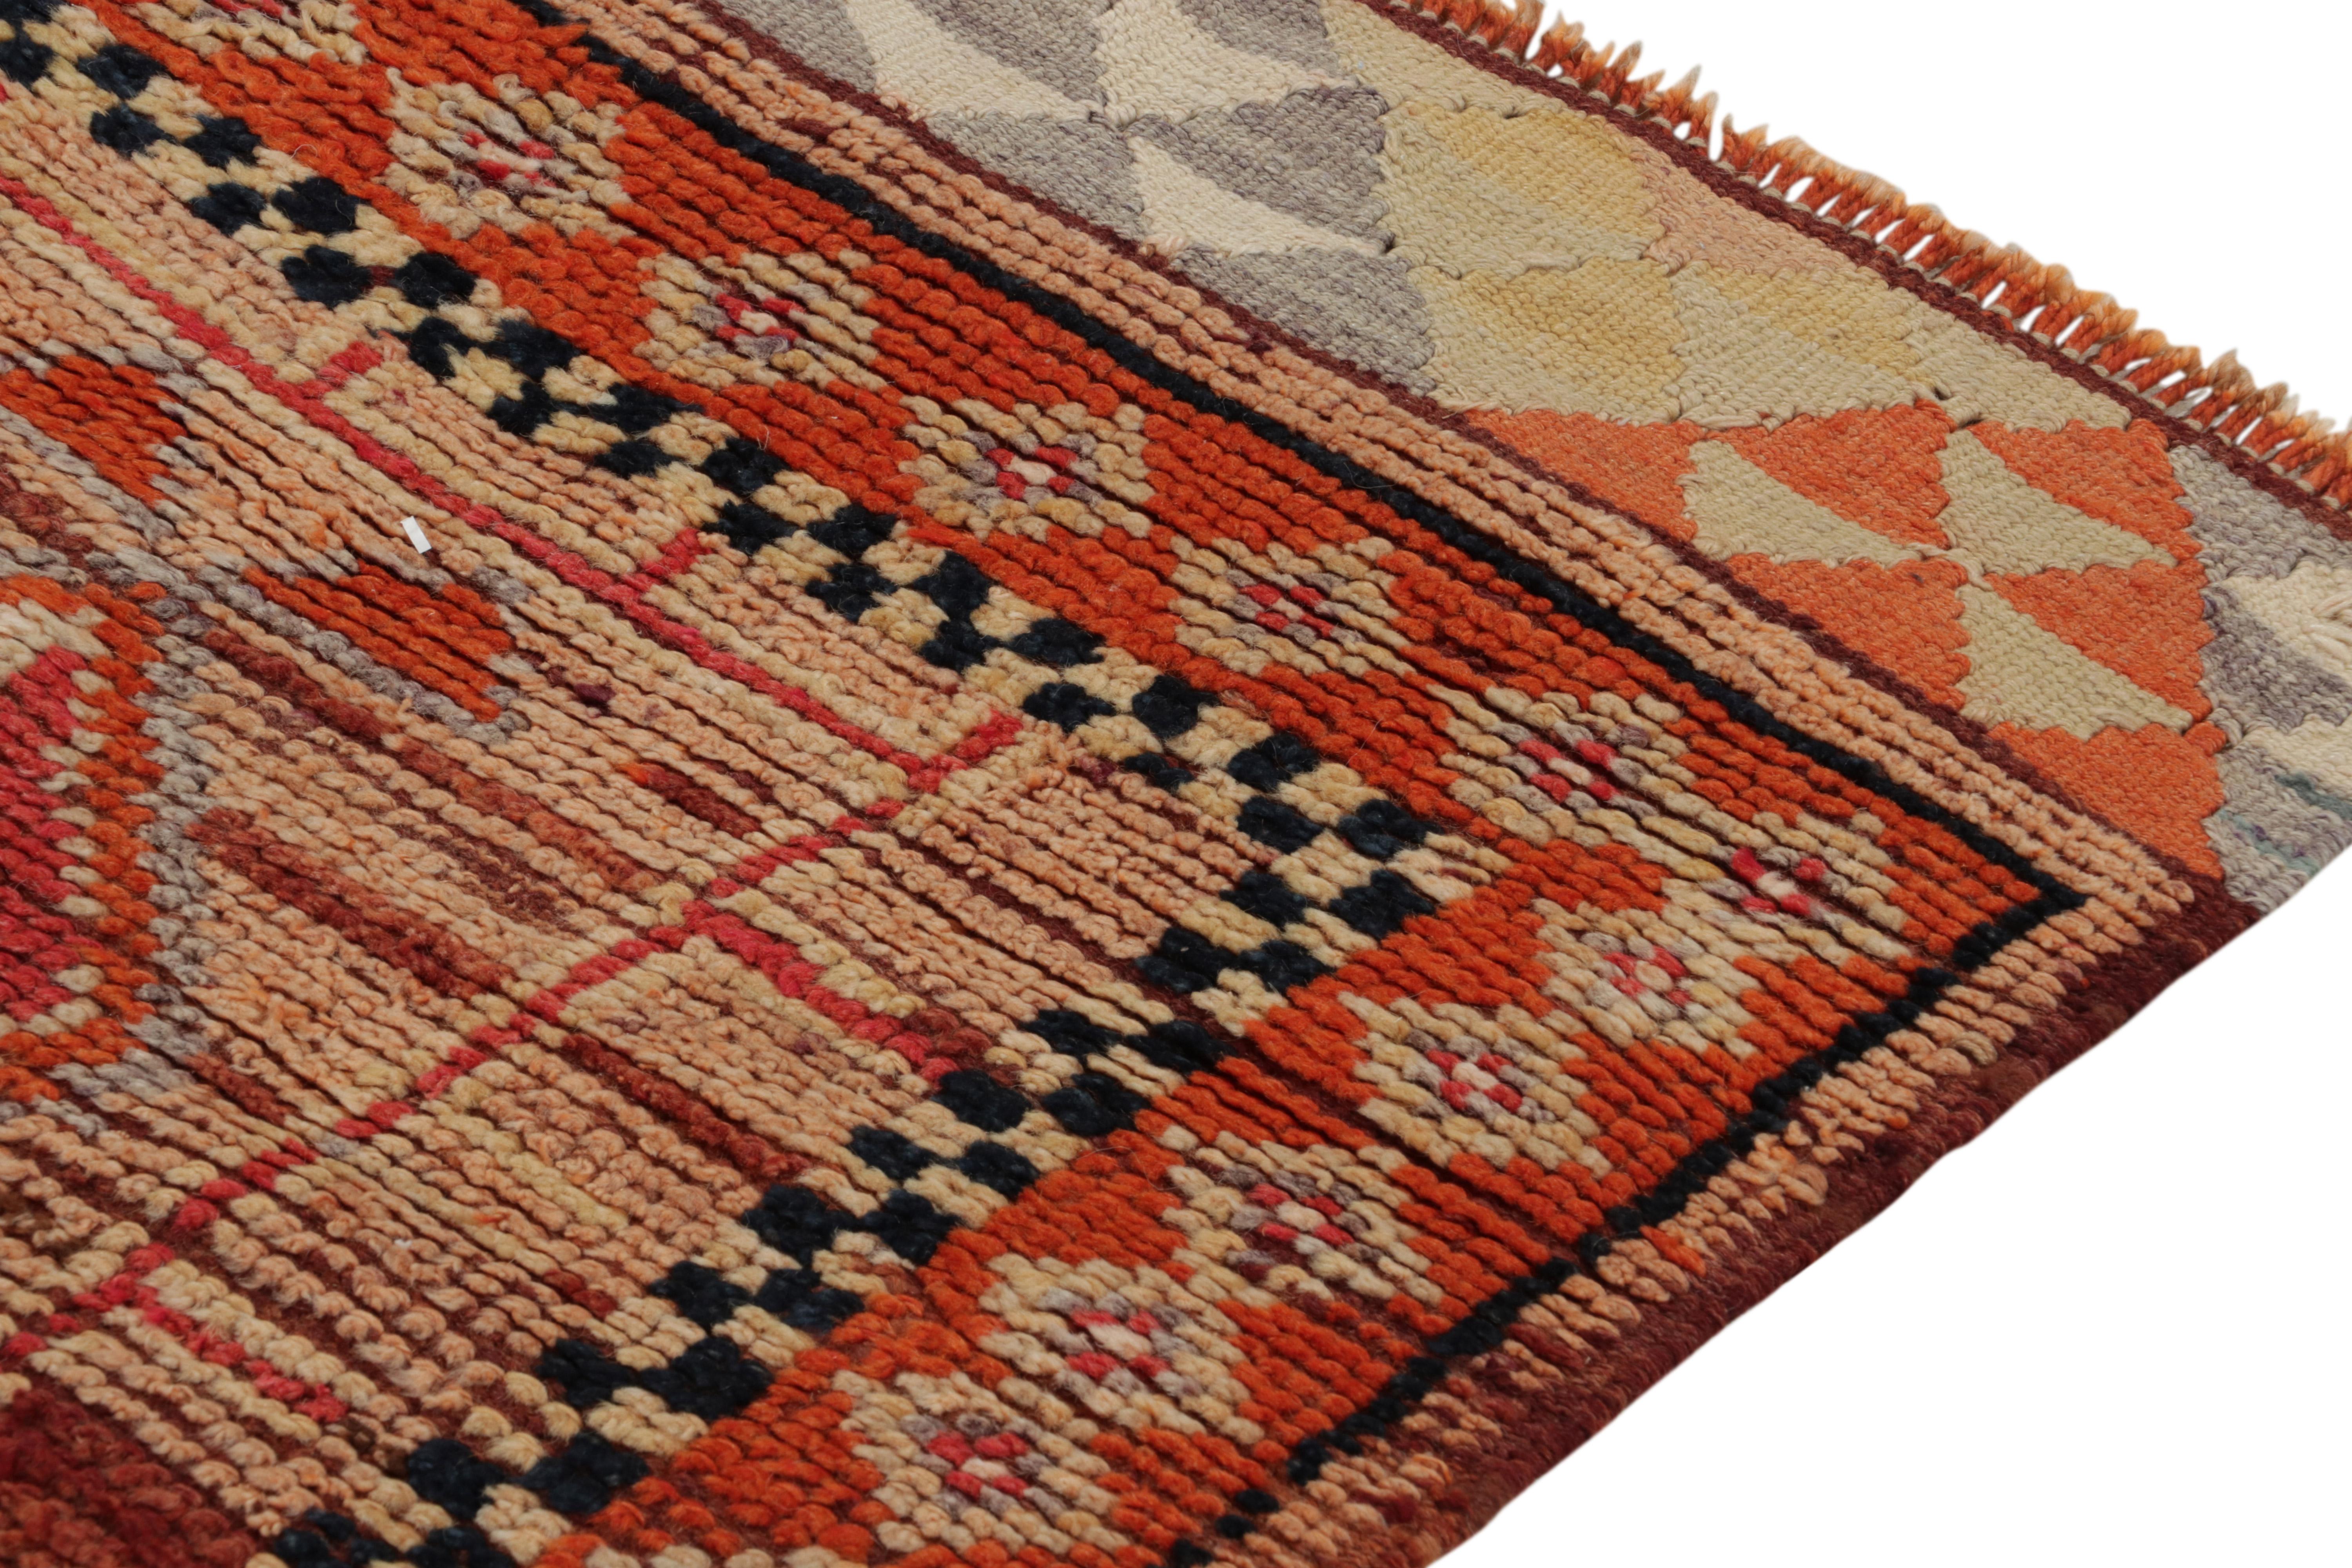 Vintage Tribal Runner in Red, Brown and Black Geometric Patterns by Rug & Kilim In Good Condition For Sale In Long Island City, NY